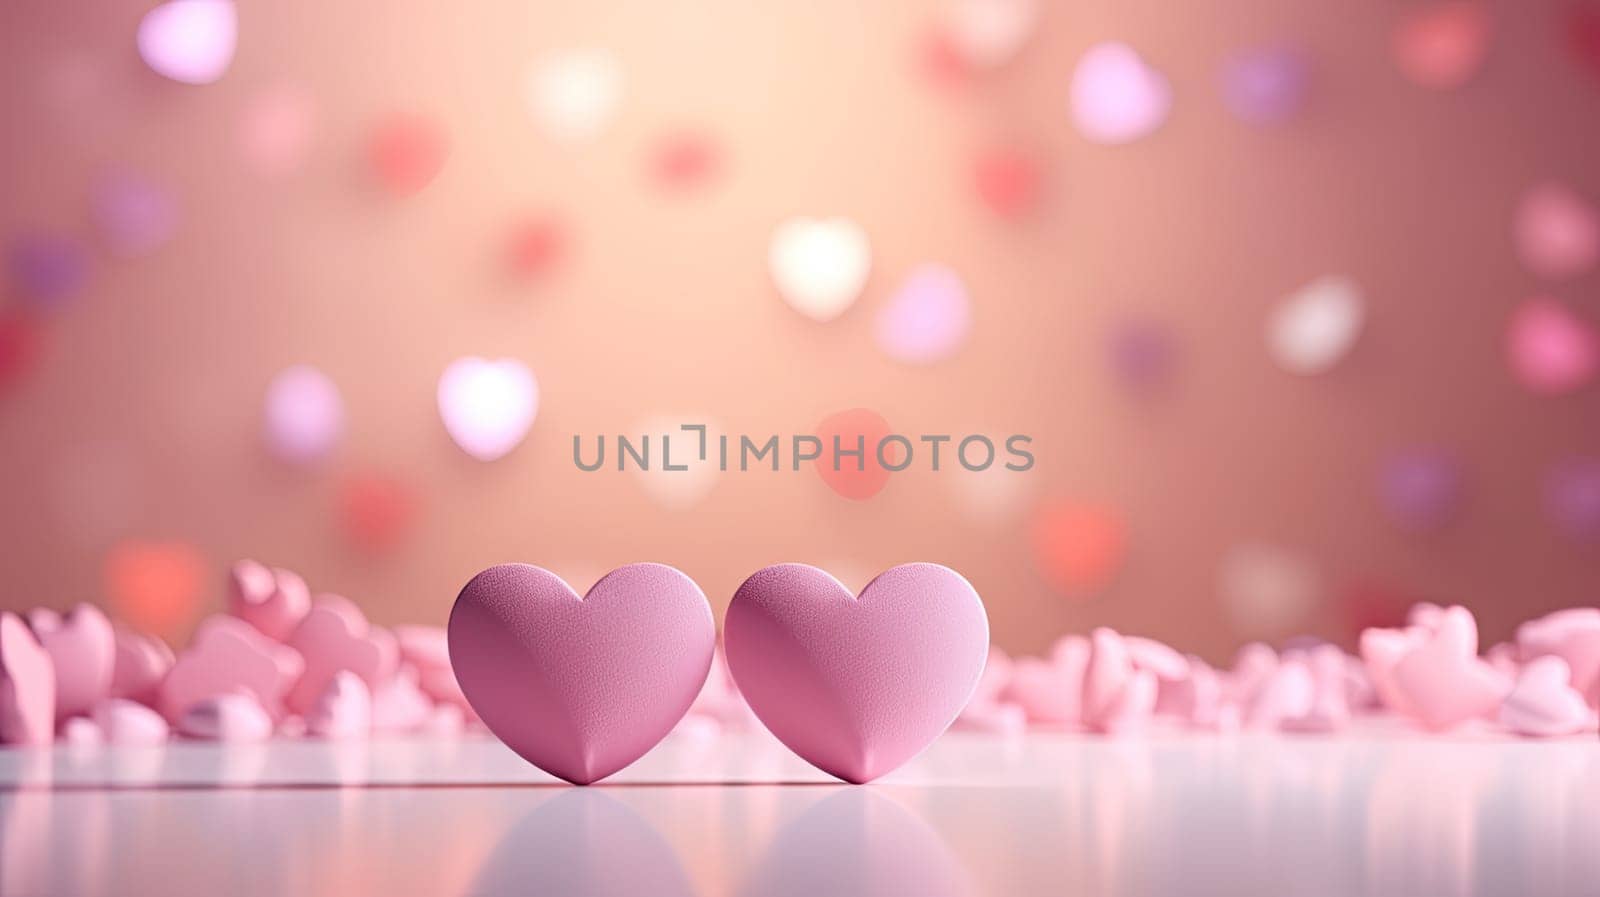 Pink hearts over a white table with blurred background and copy space. Love and san valentine concept.